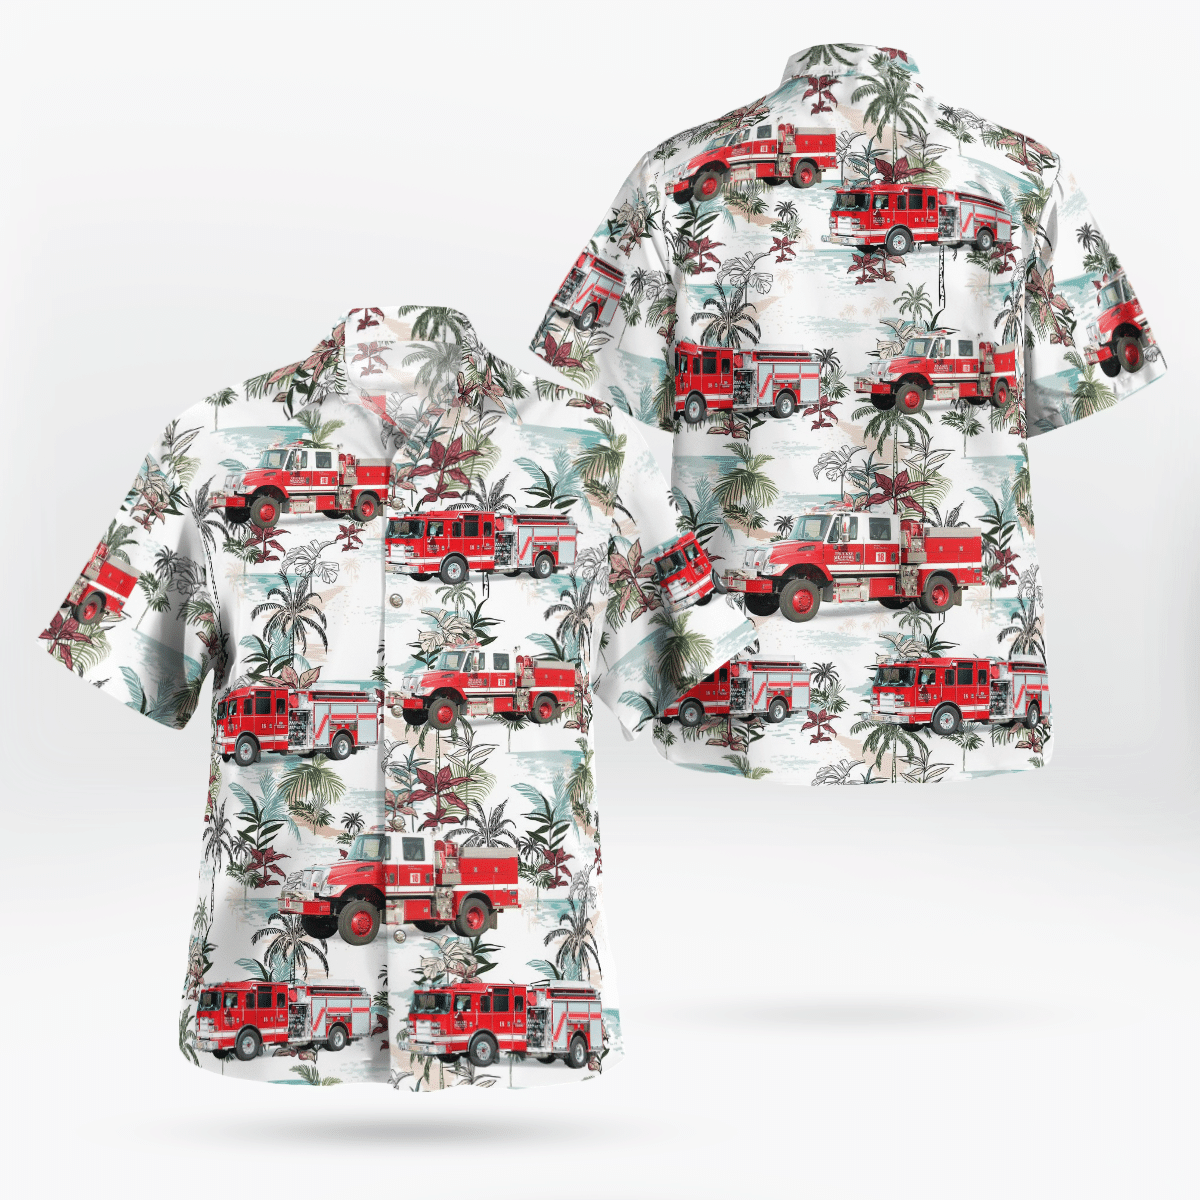 If you want to be noticed, wear These Trendy Hawaiian Shirt 124